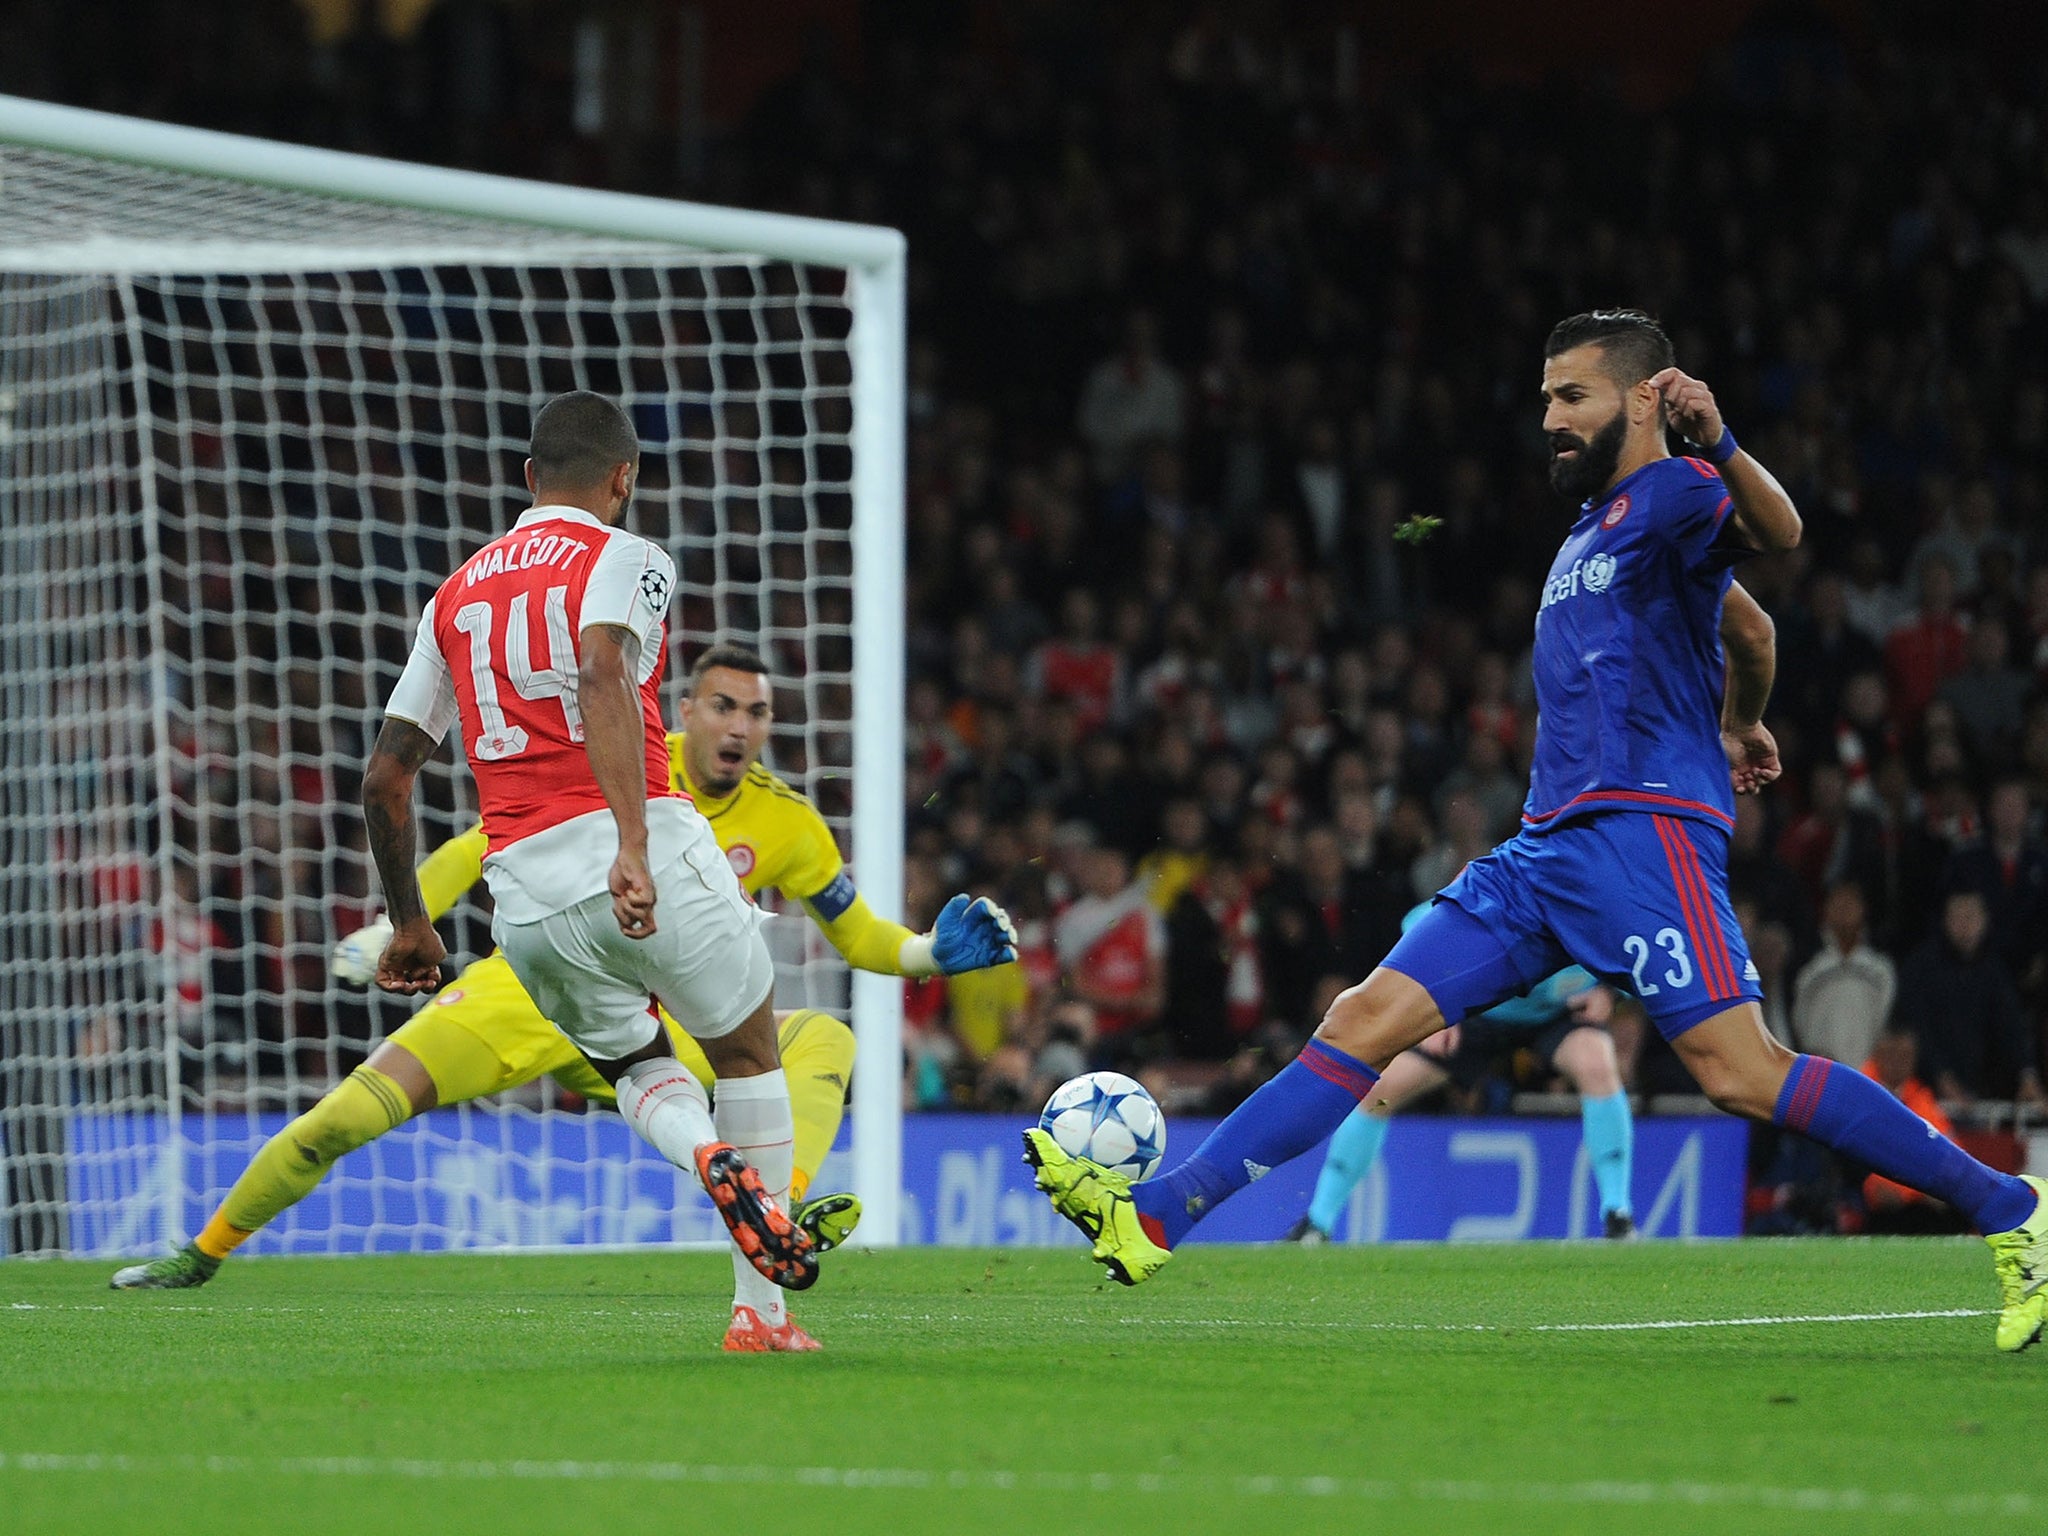 Theo Walcott's equalises for Arsenal to make it 1-1